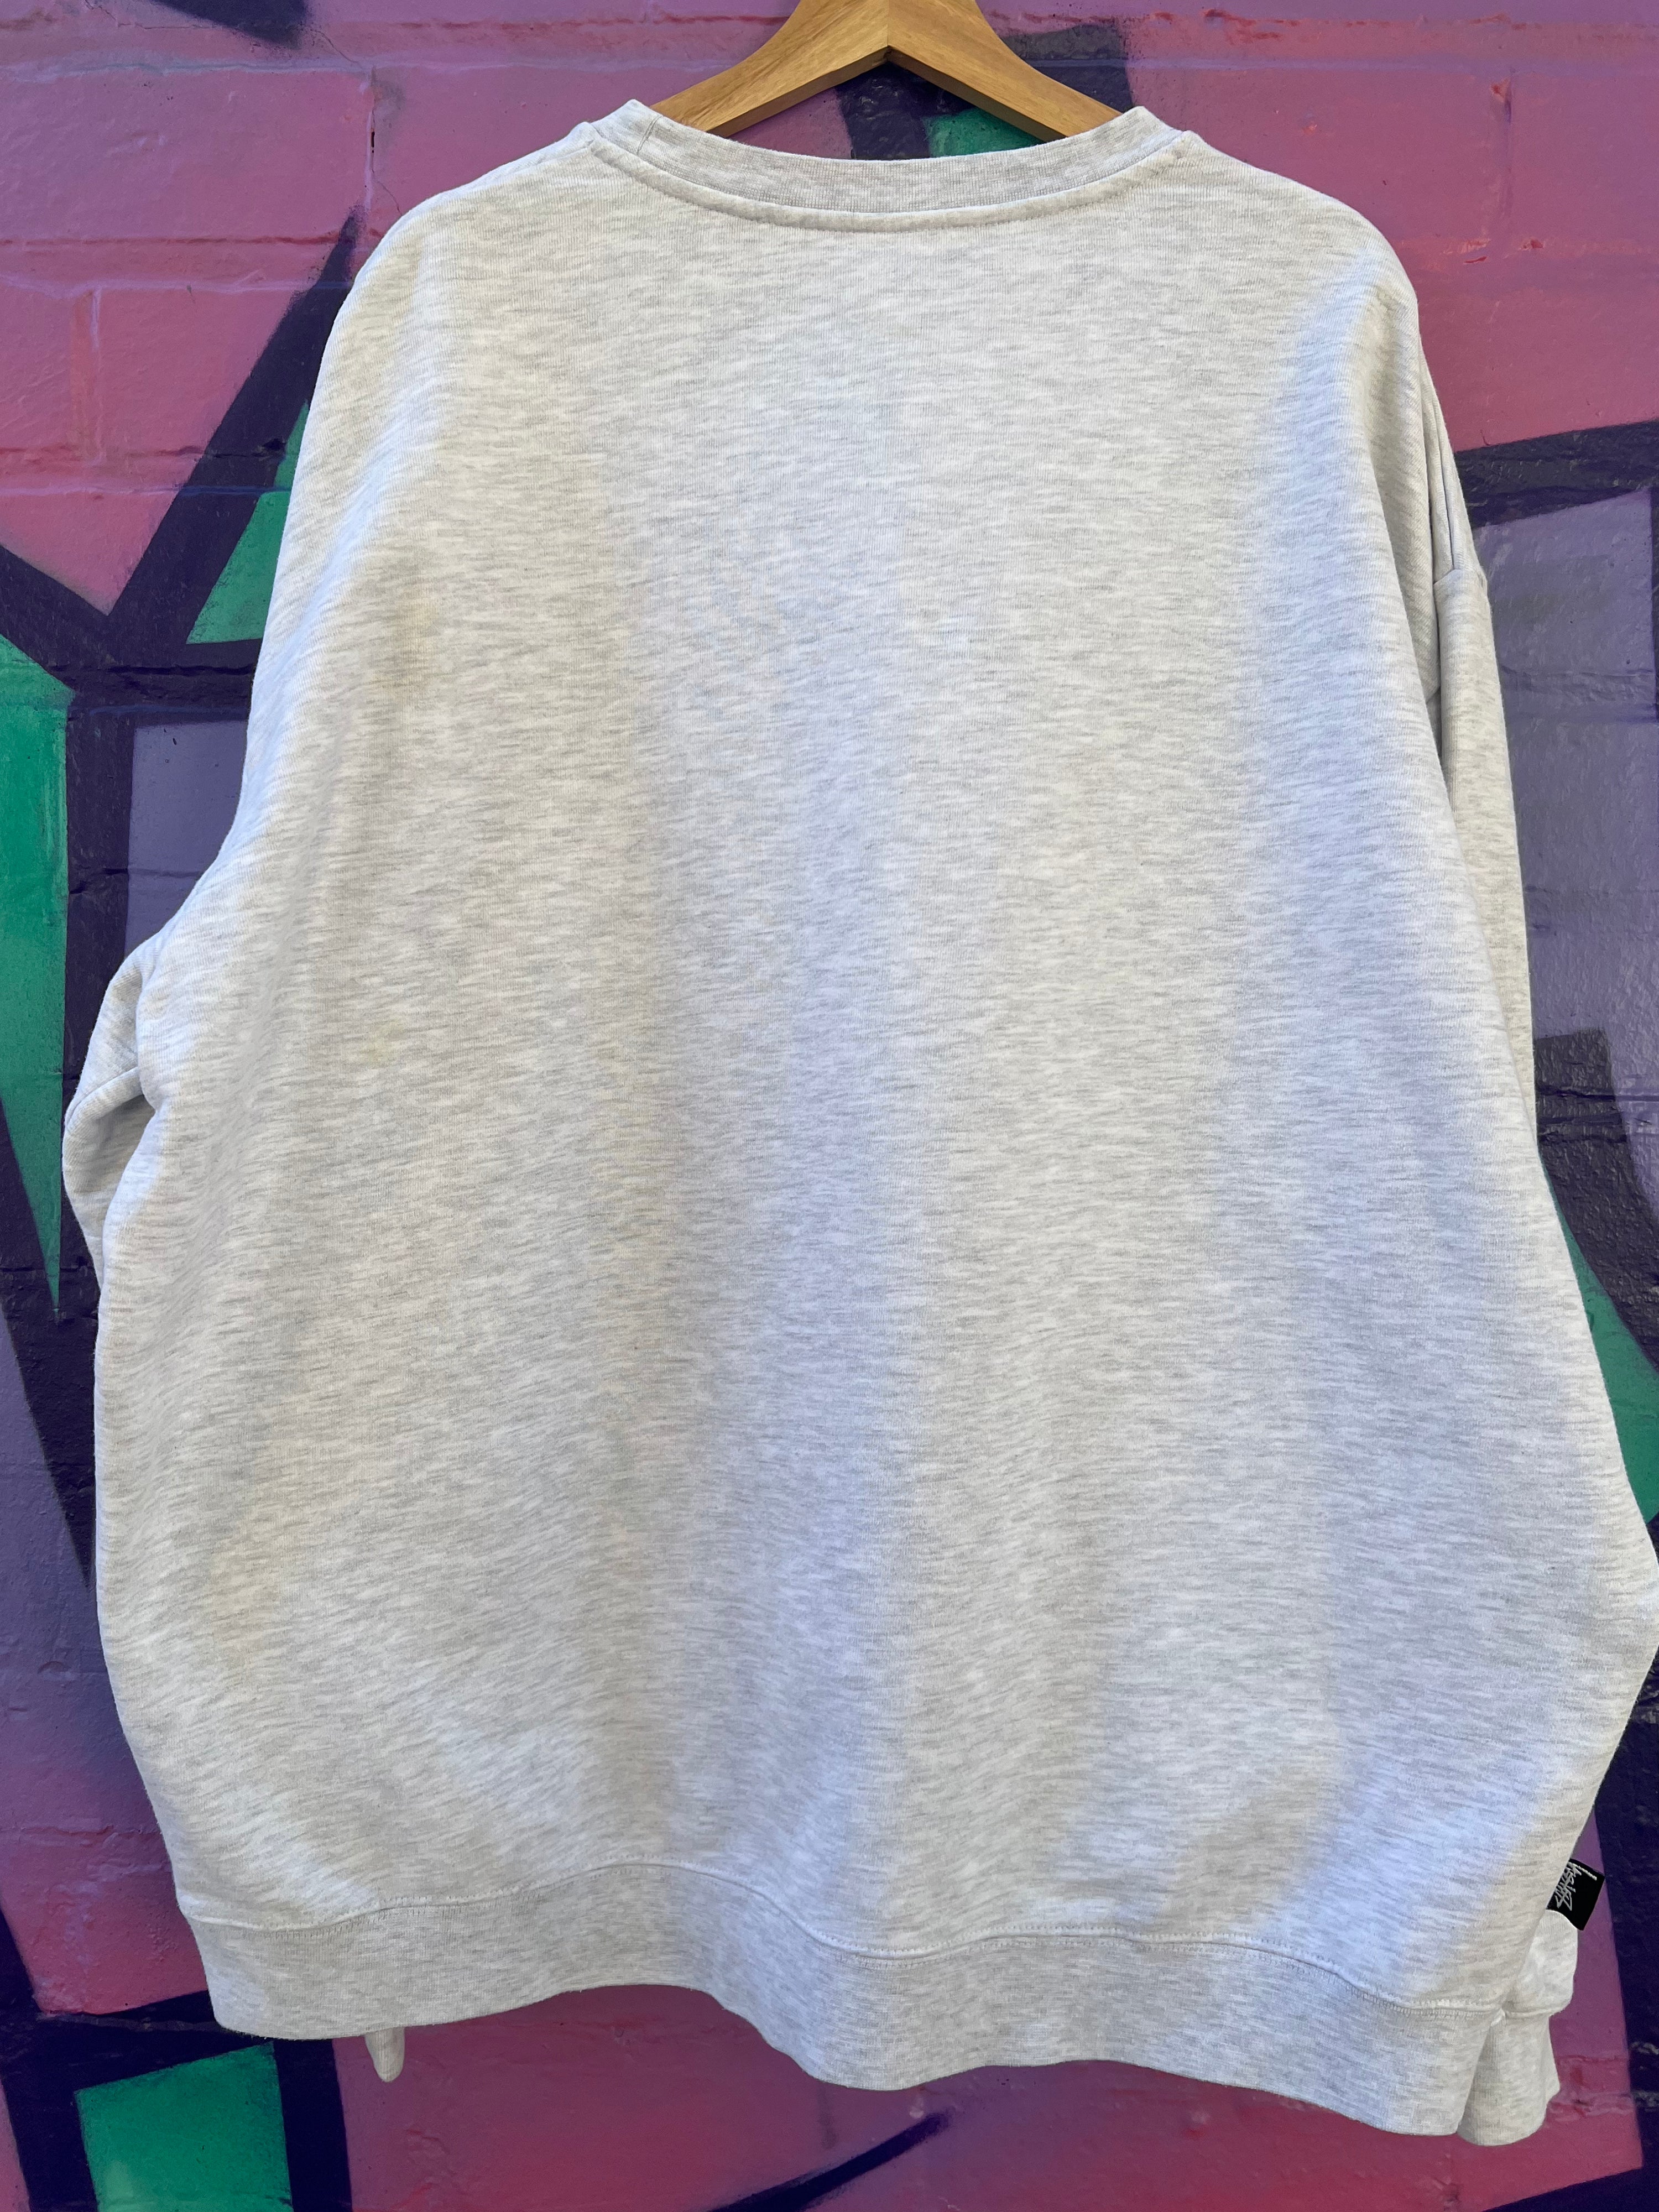 2XL - Stussy Grey/White Embroidered Jumper